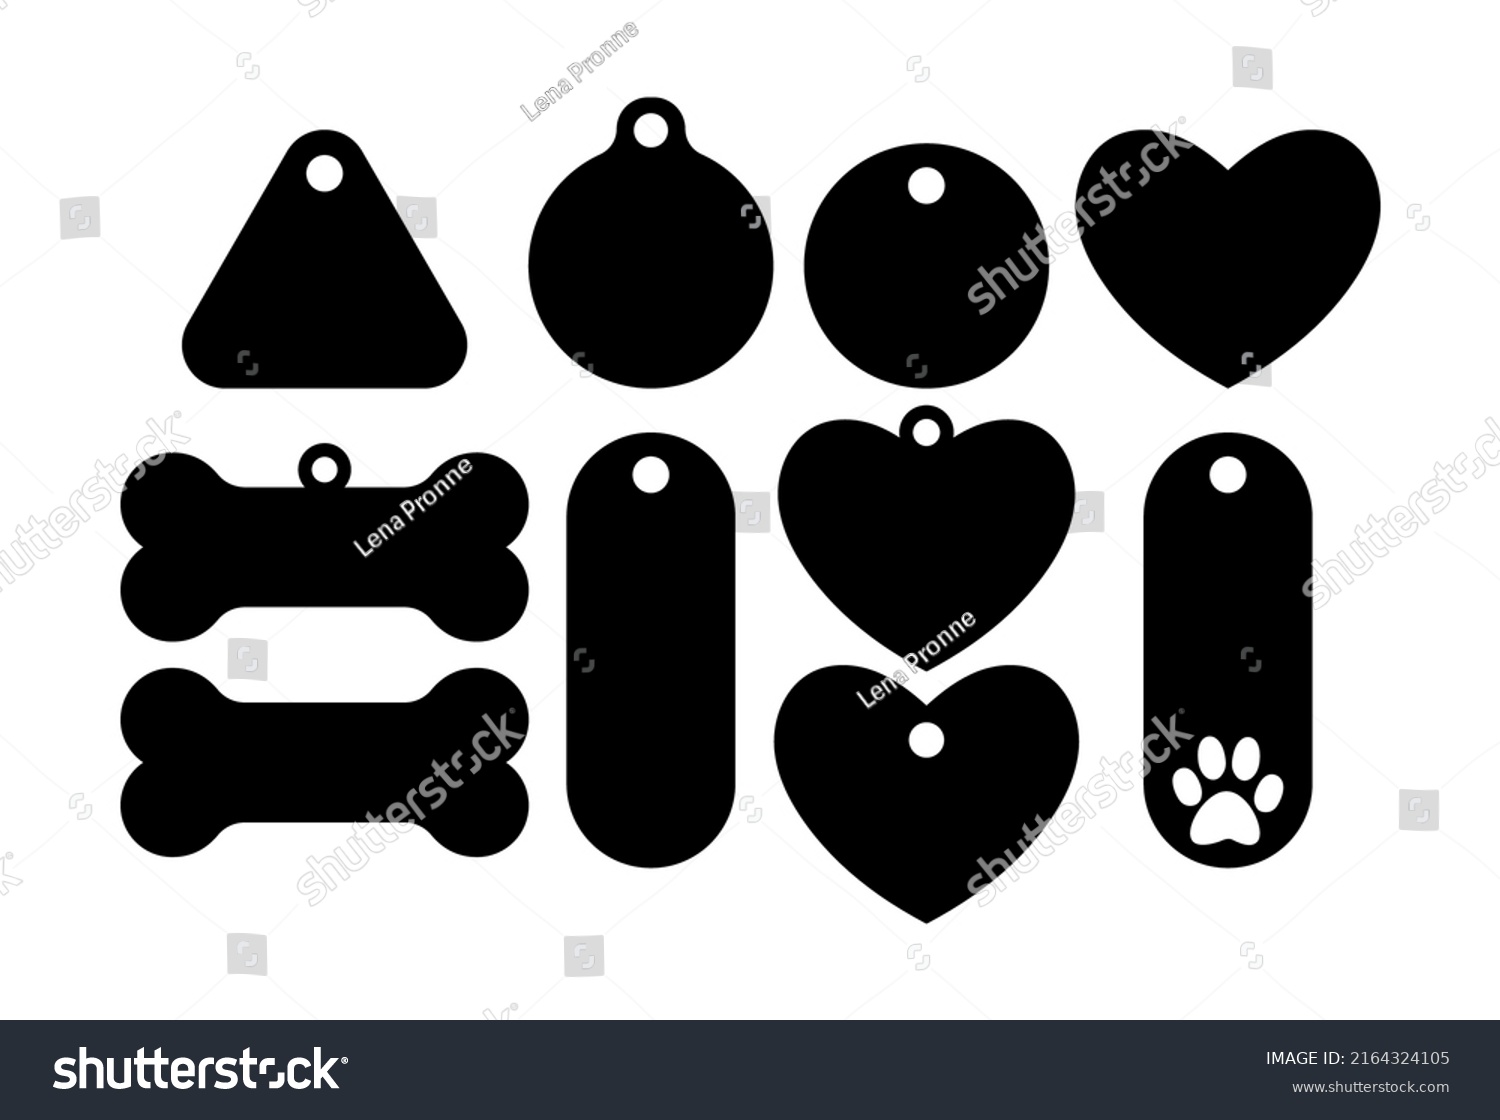 SVG of Pet tags set. Template for plotter lazer cutting of paper, wood. svg